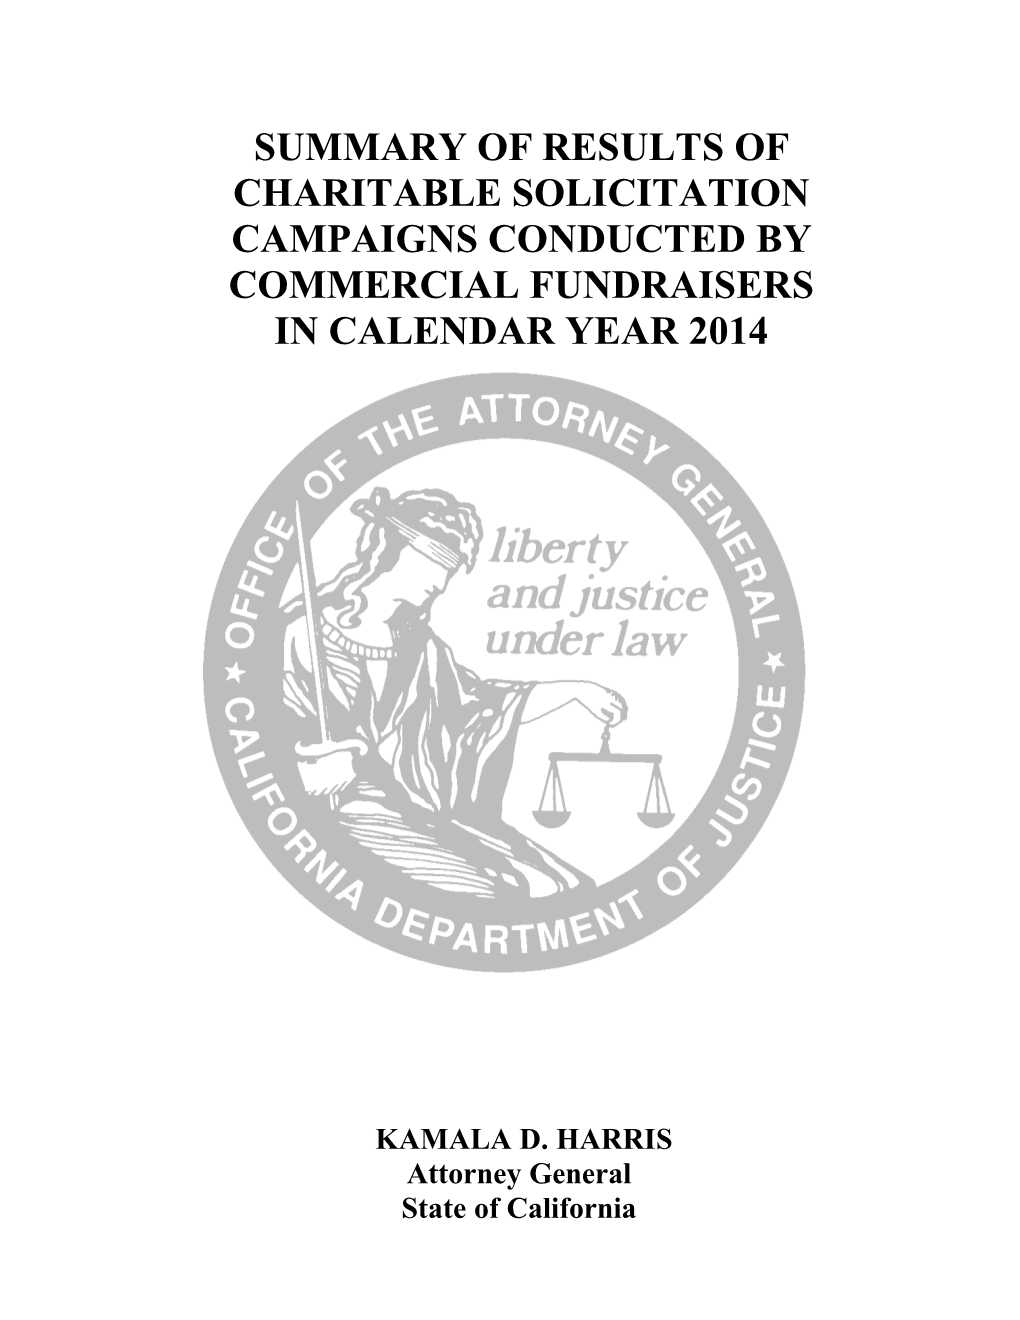 Summary of Results of Charitable Solicitation Campaigns Conducted by Commercial Fundraisers in Calendar Year 2014